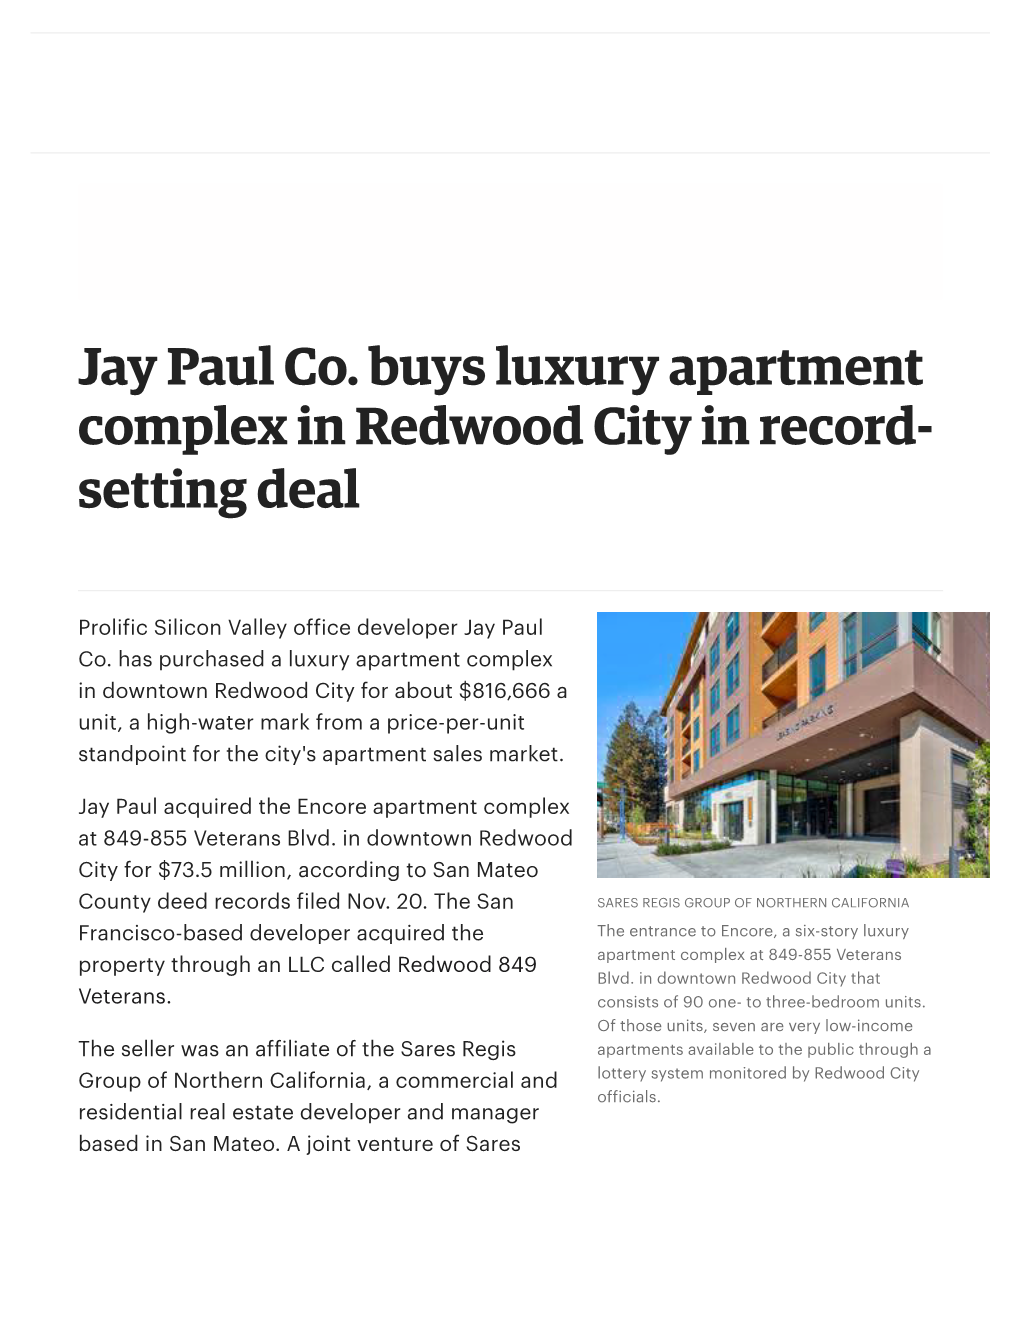 Jay Paul Co. Buys Luxury Apartment Complex in Redwood City in Record- Setting Deal